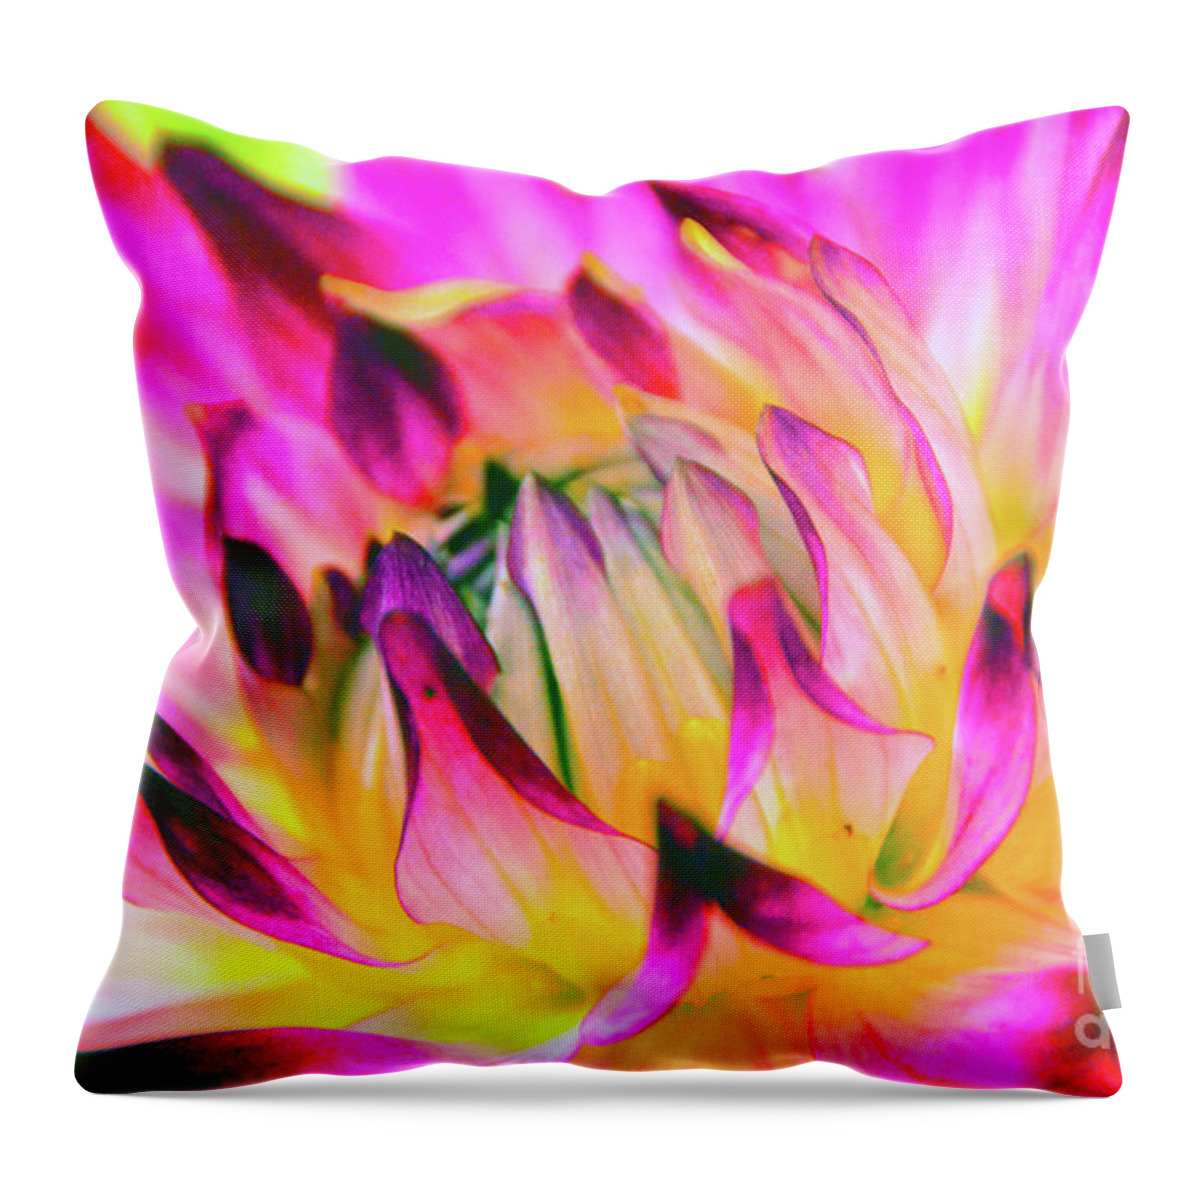 Backgrounds Throw Pillow featuring the photograph Eruption by Brian O'Kelly